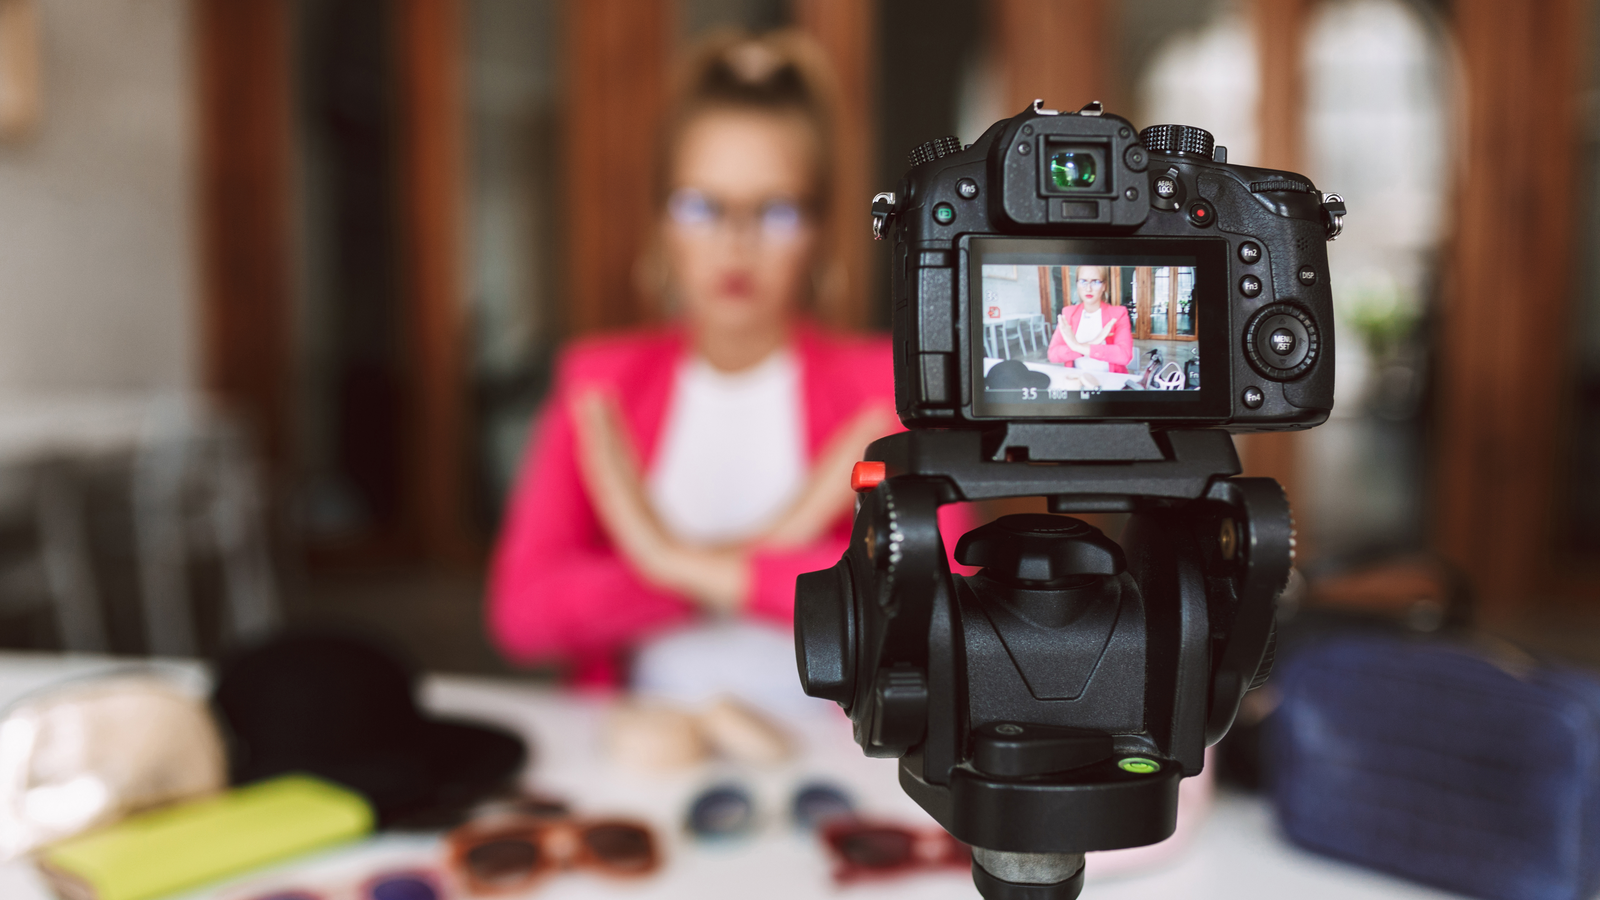 MVLA Stock. A woman in a pink jacket sits at a table inside while filming herself on camera